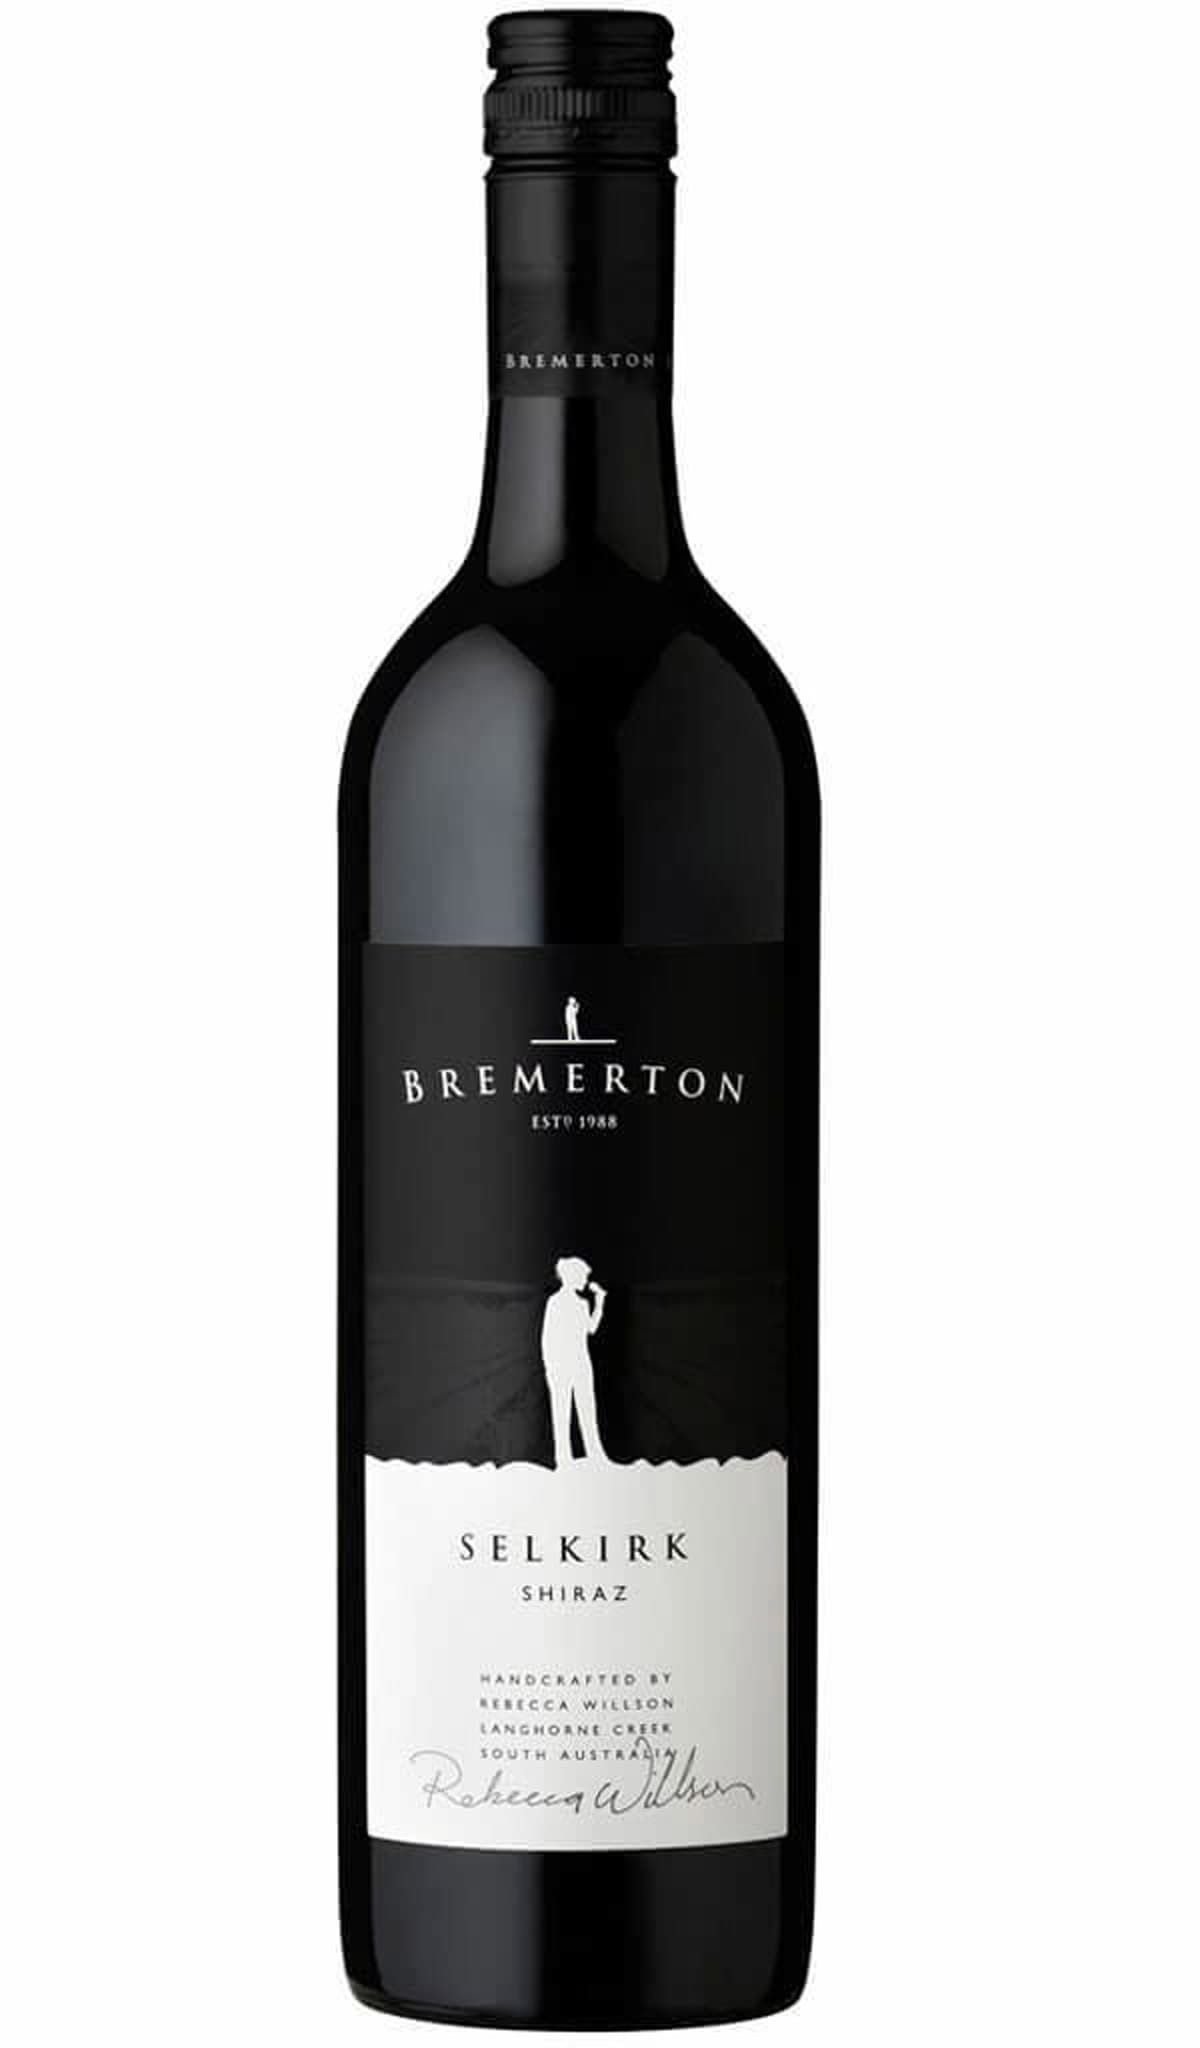 Find out more or buy Bremerton Selkirk Shiraz 2021 (Langhorne Creek) online at Wine Sellers Direct - Australia’s independent liquor specialists.